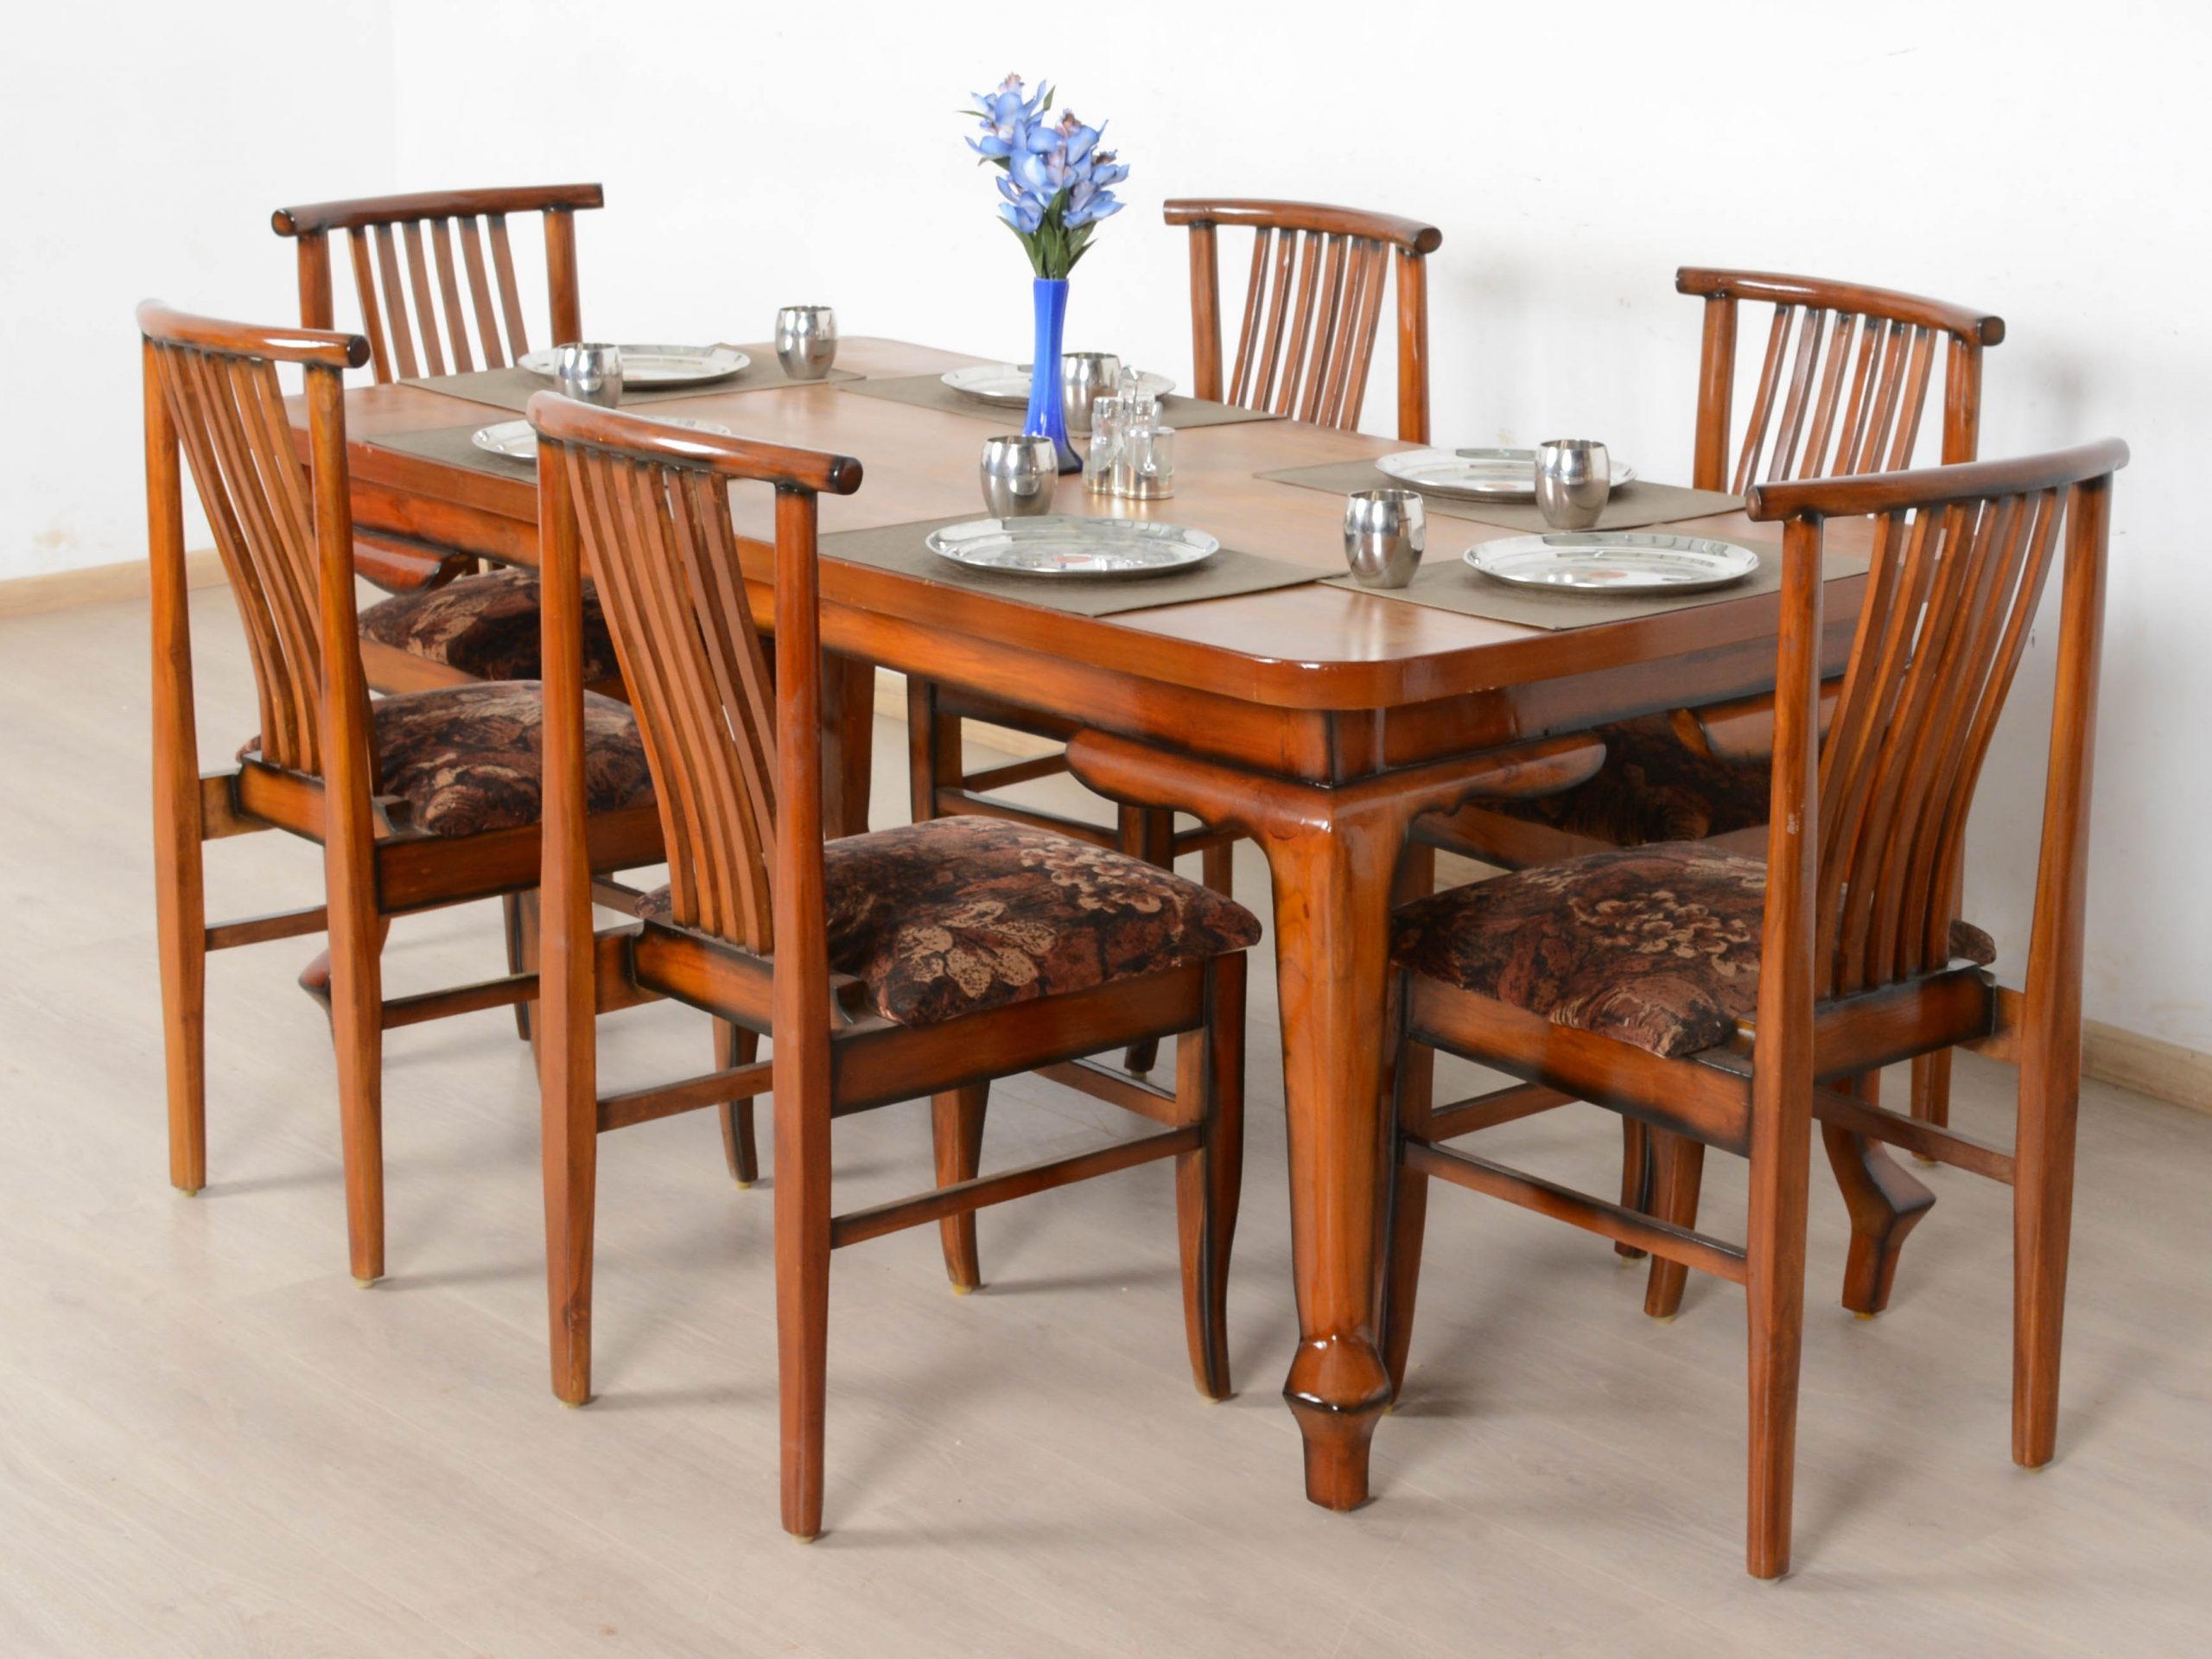 Olx Dining Room Table And Chairs Kzn